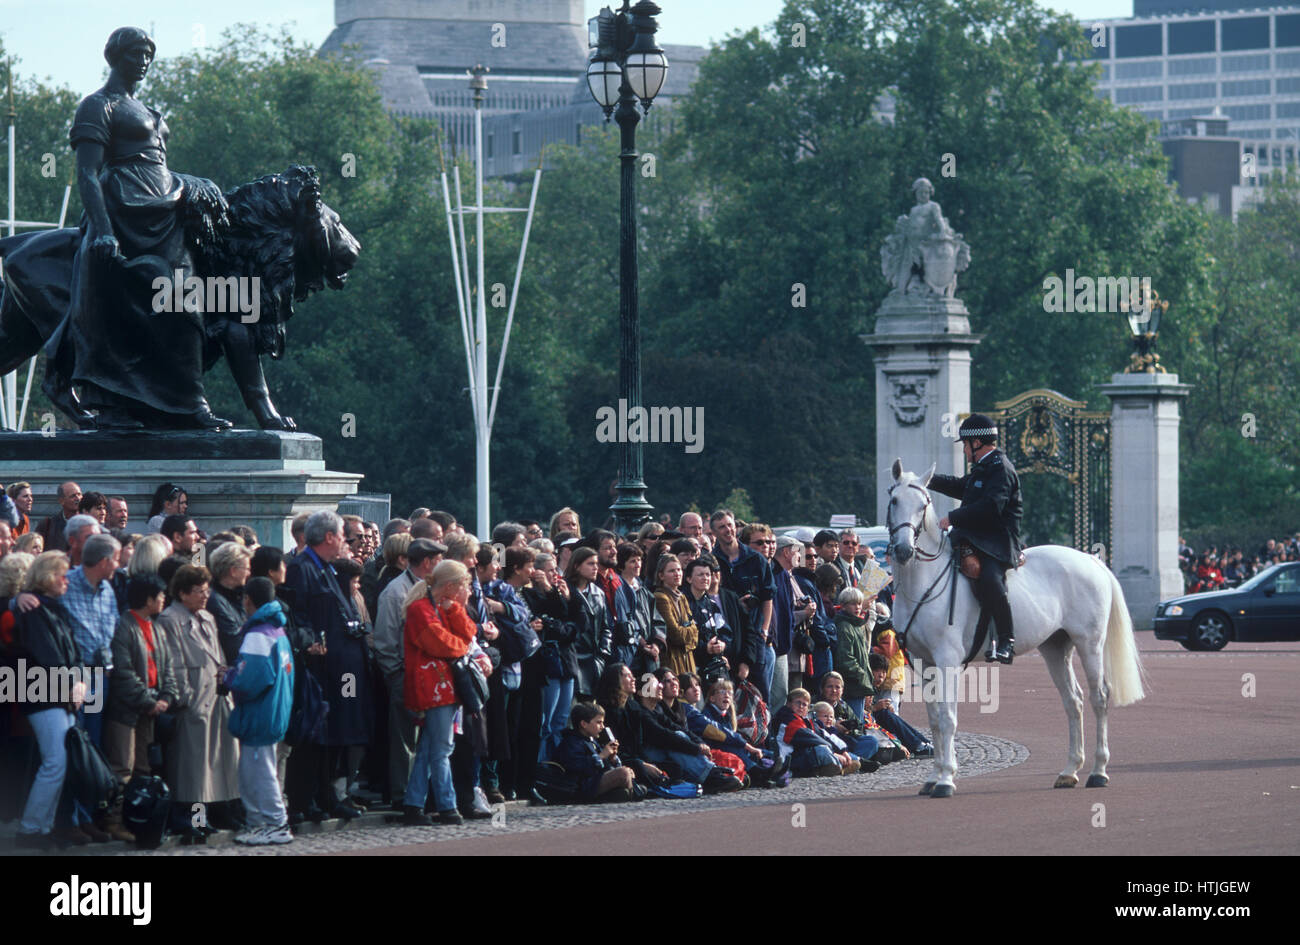 Crowd at Buckingham Palace for Changing of the guard. Bobbie on horse and Queen Victoria statue Stock Photo